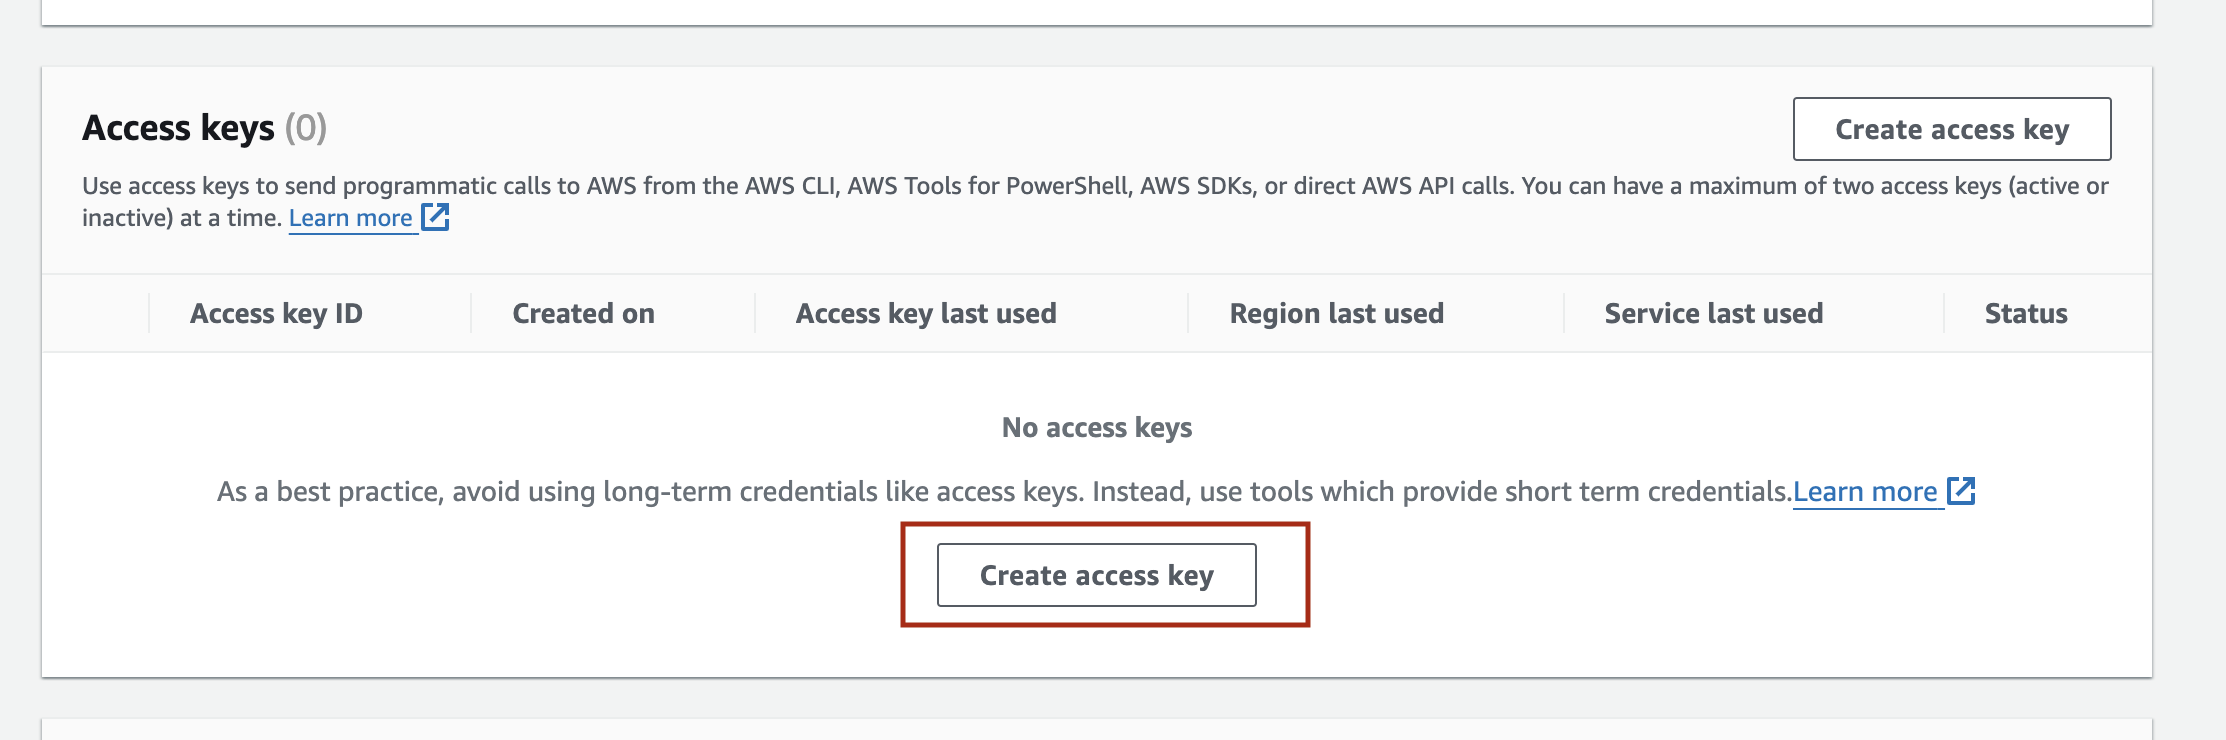 Access keys section in AWS Console, the button with text &lsquo;Create access key&rsquo; is marked in a red box